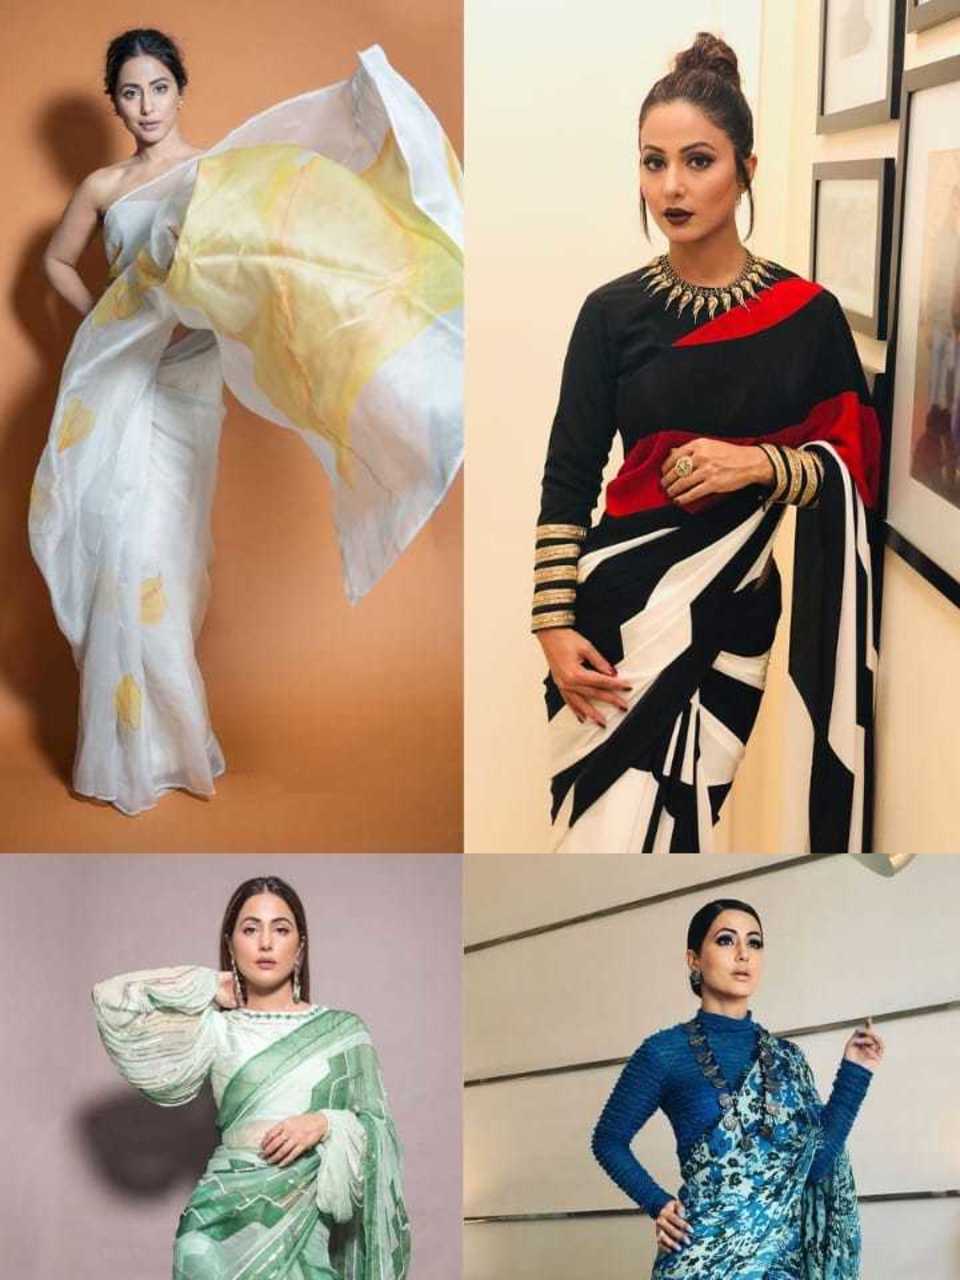 Times when Hina Khan nailed her stylish saree looks | Times of India